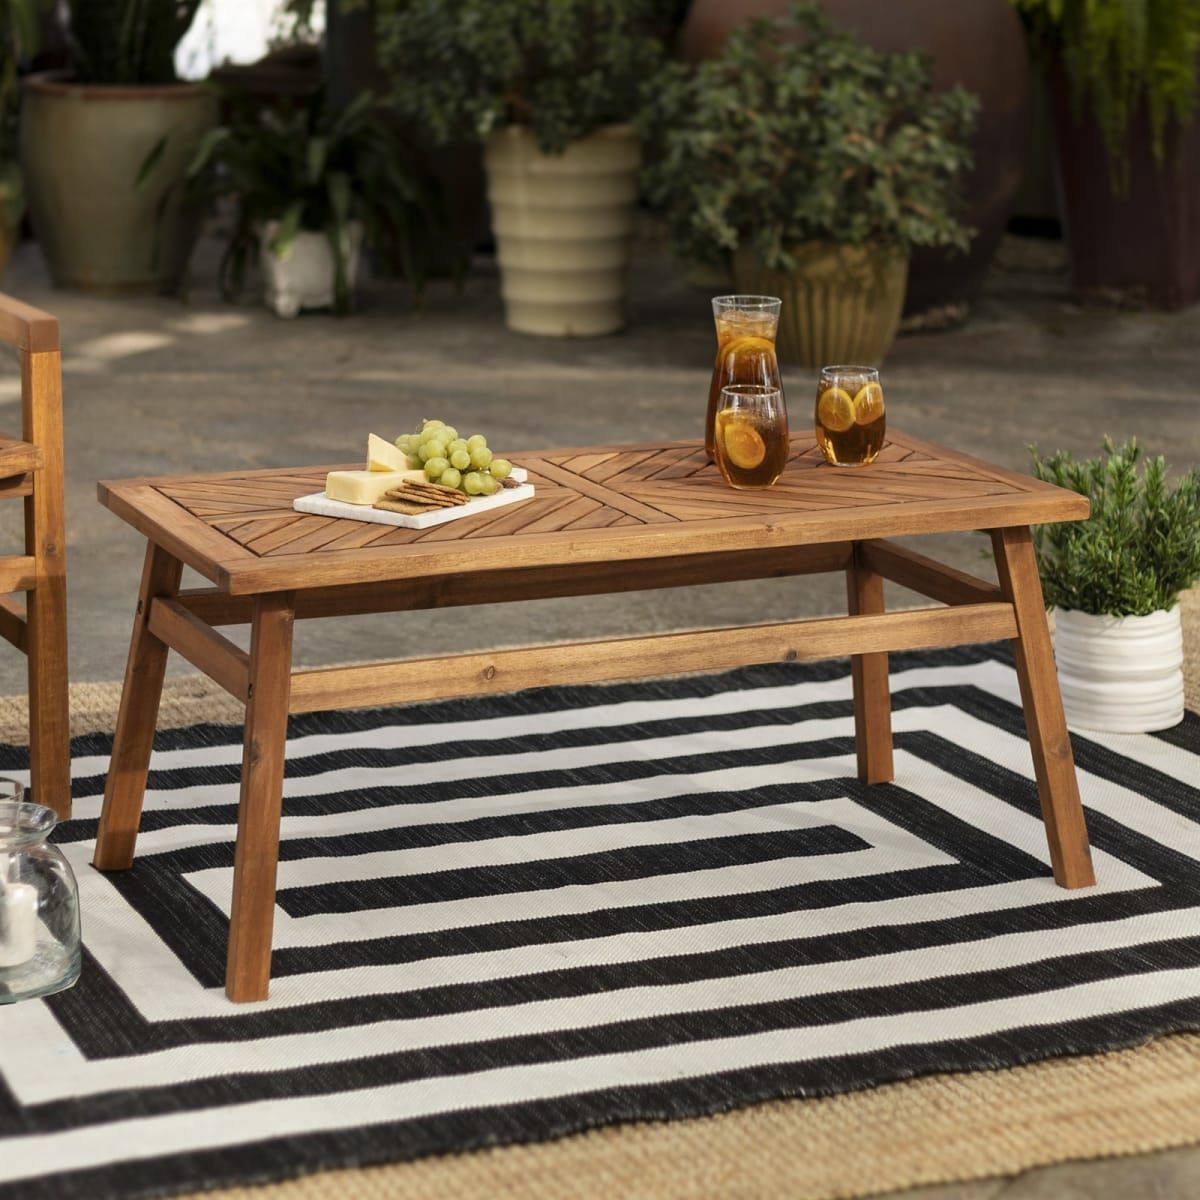 With An Acacia Wood Construction, This Patio Coffee Table Is Perfect Throughout Modern Outdoor Patio Coffee Tables (Gallery 17 of 20)